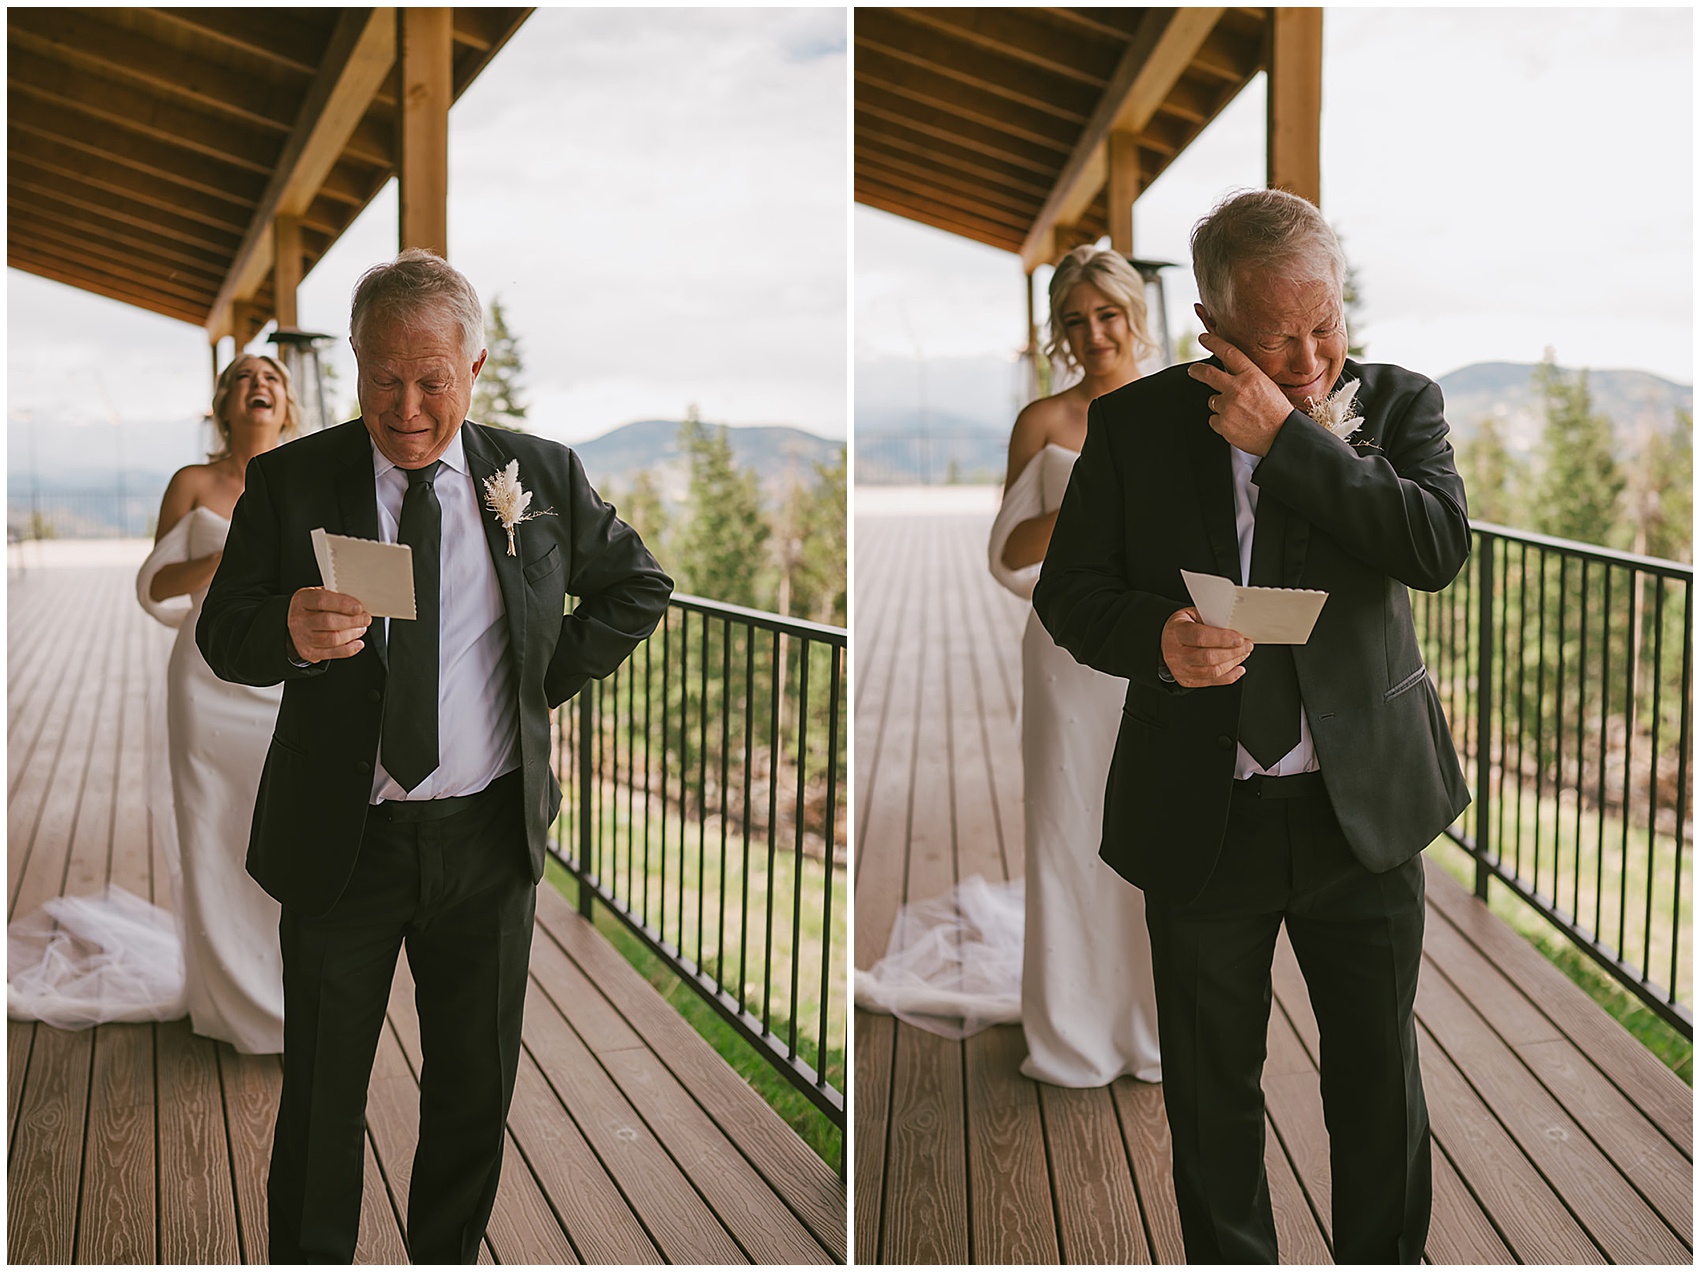 A father cries while reading a letter from his daughter standing behind him in a wedding dress north star gatherings wedding